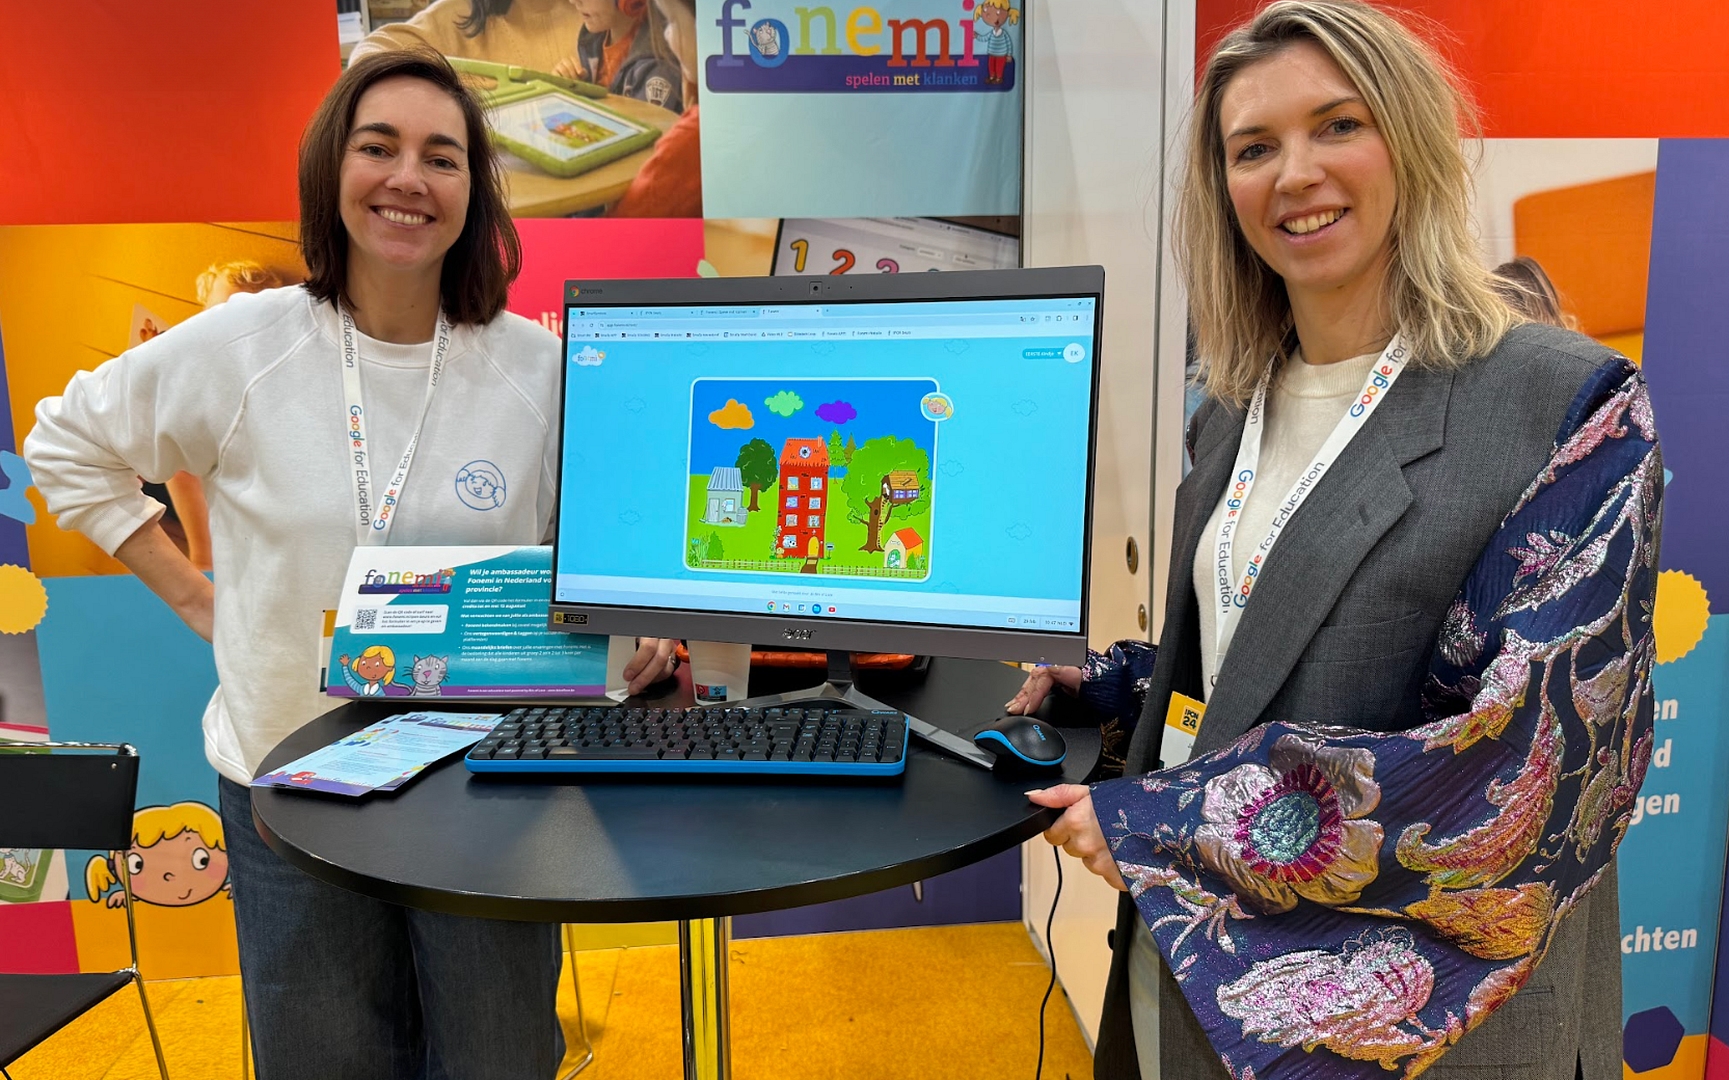 Fonemi’s mission: Flemish educational tool expands to the Netherlands